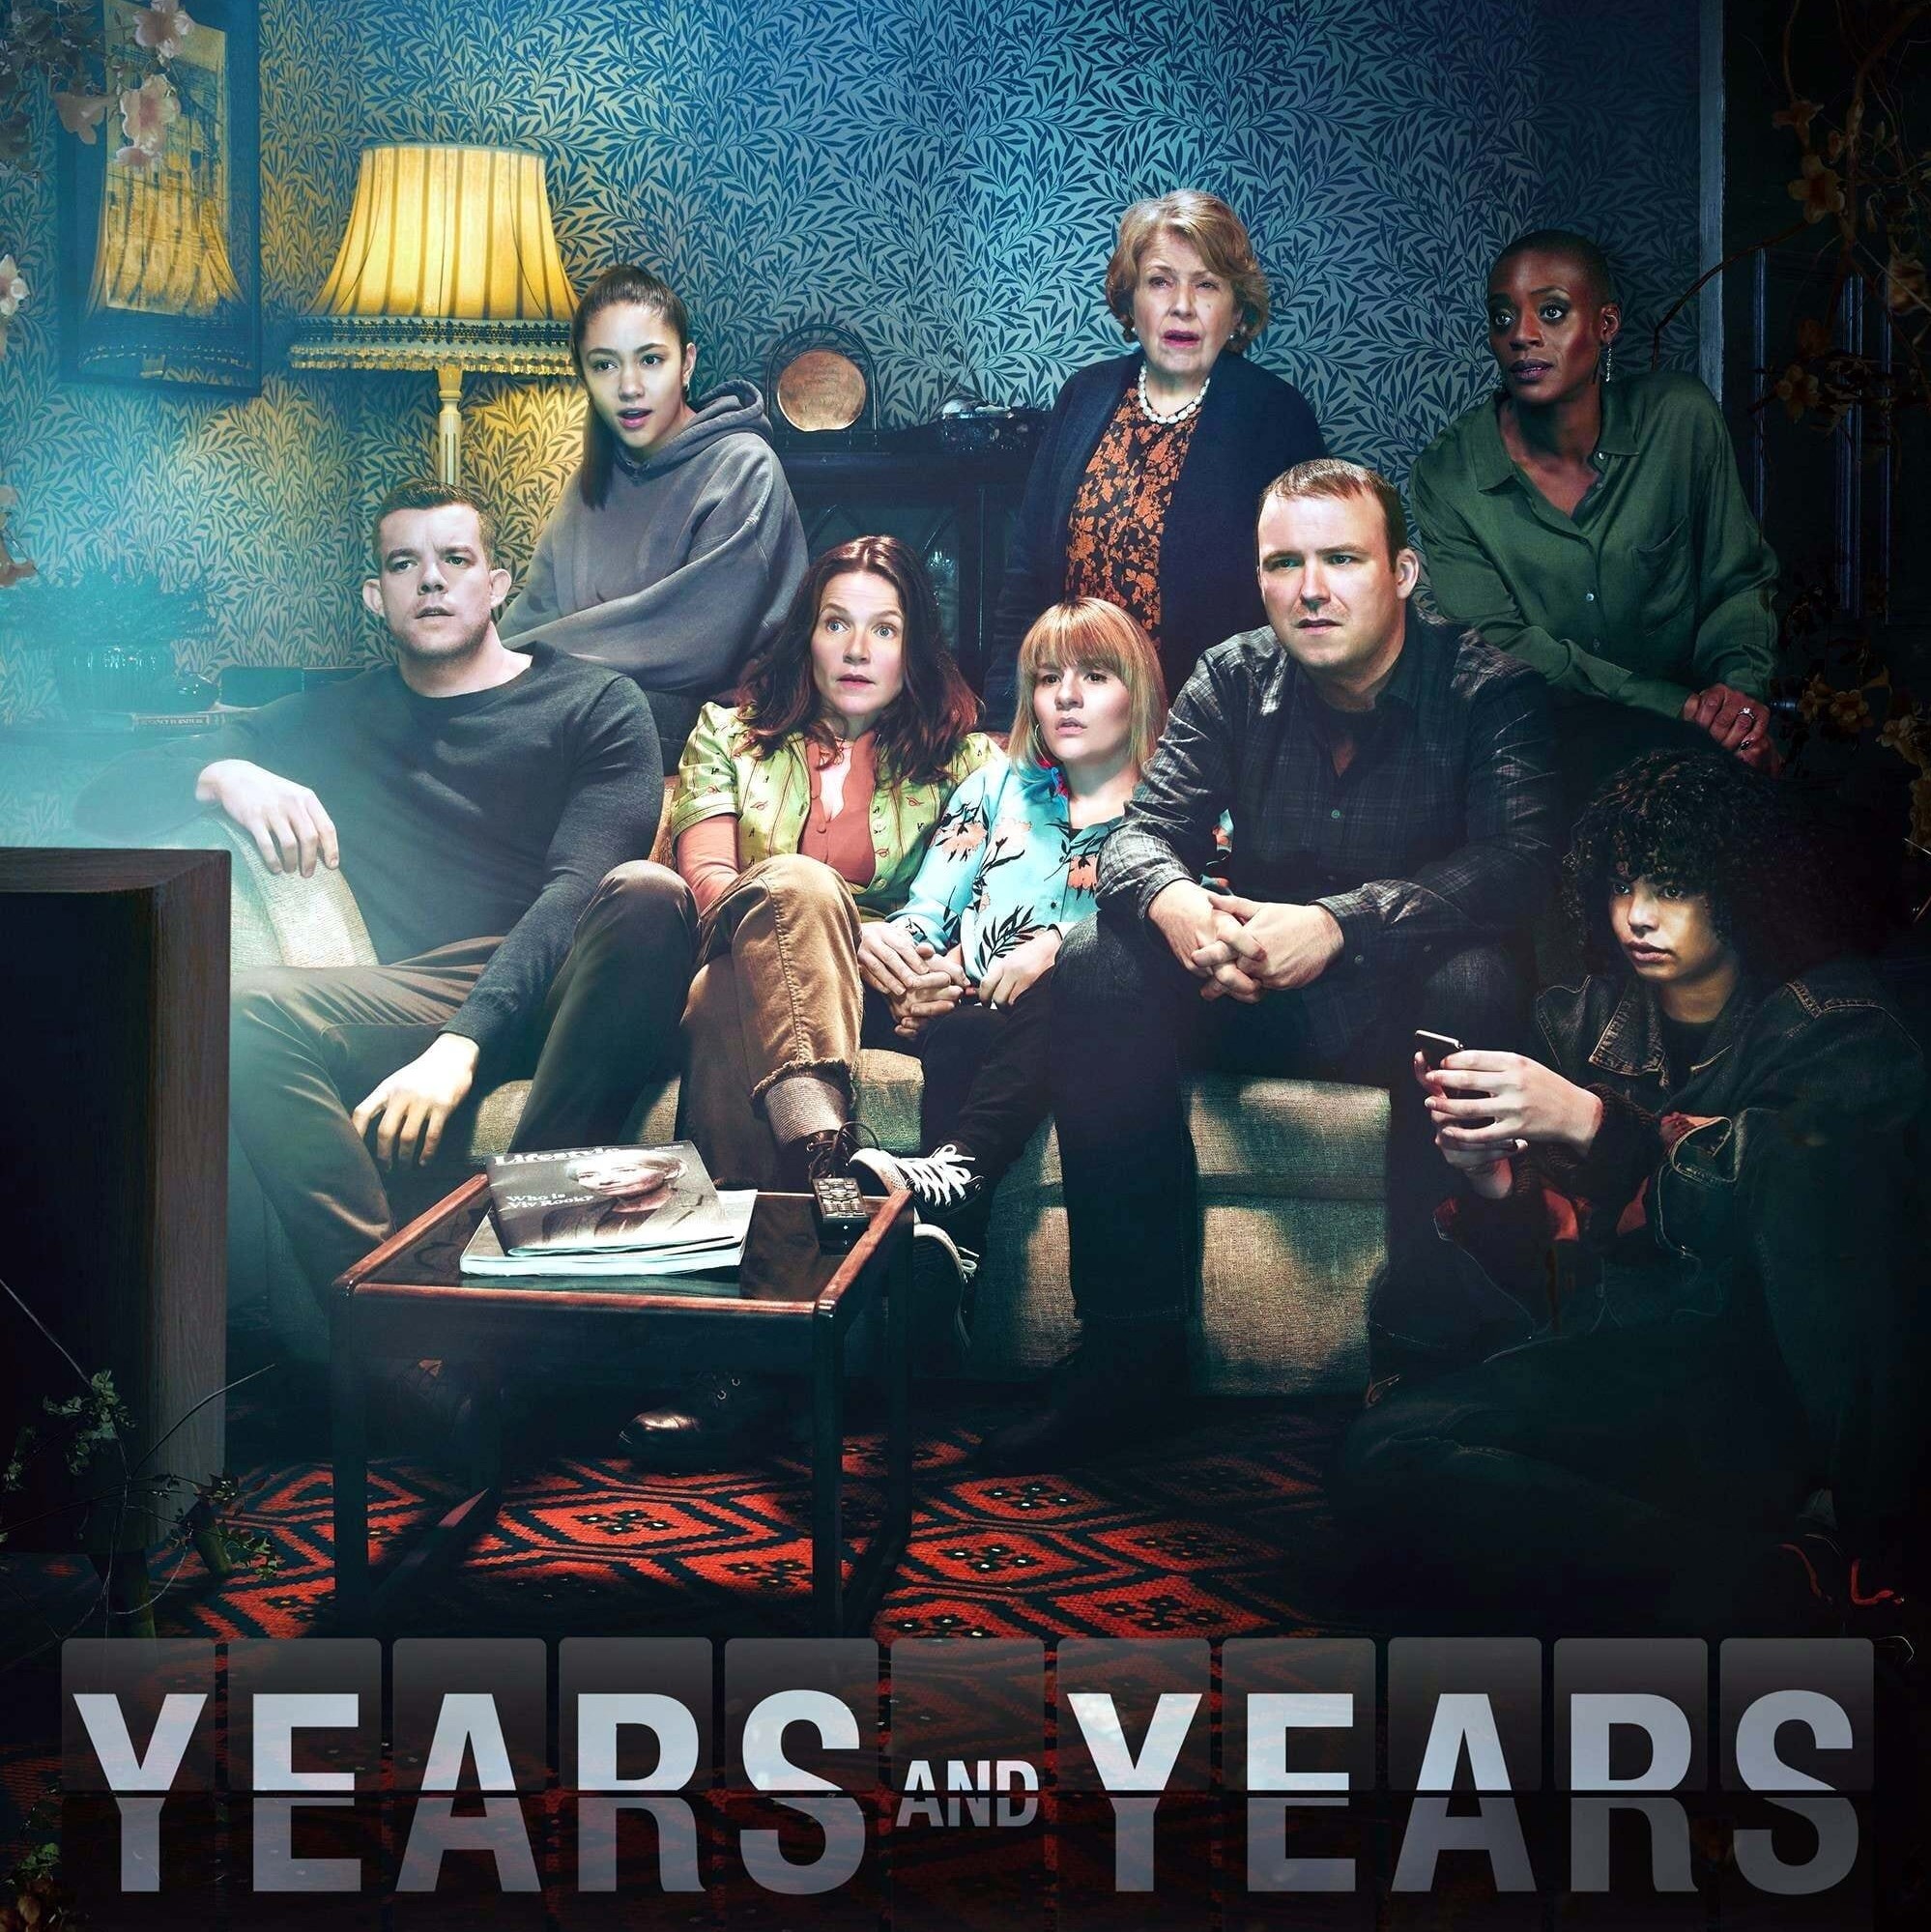 Affiche de la série Years and years